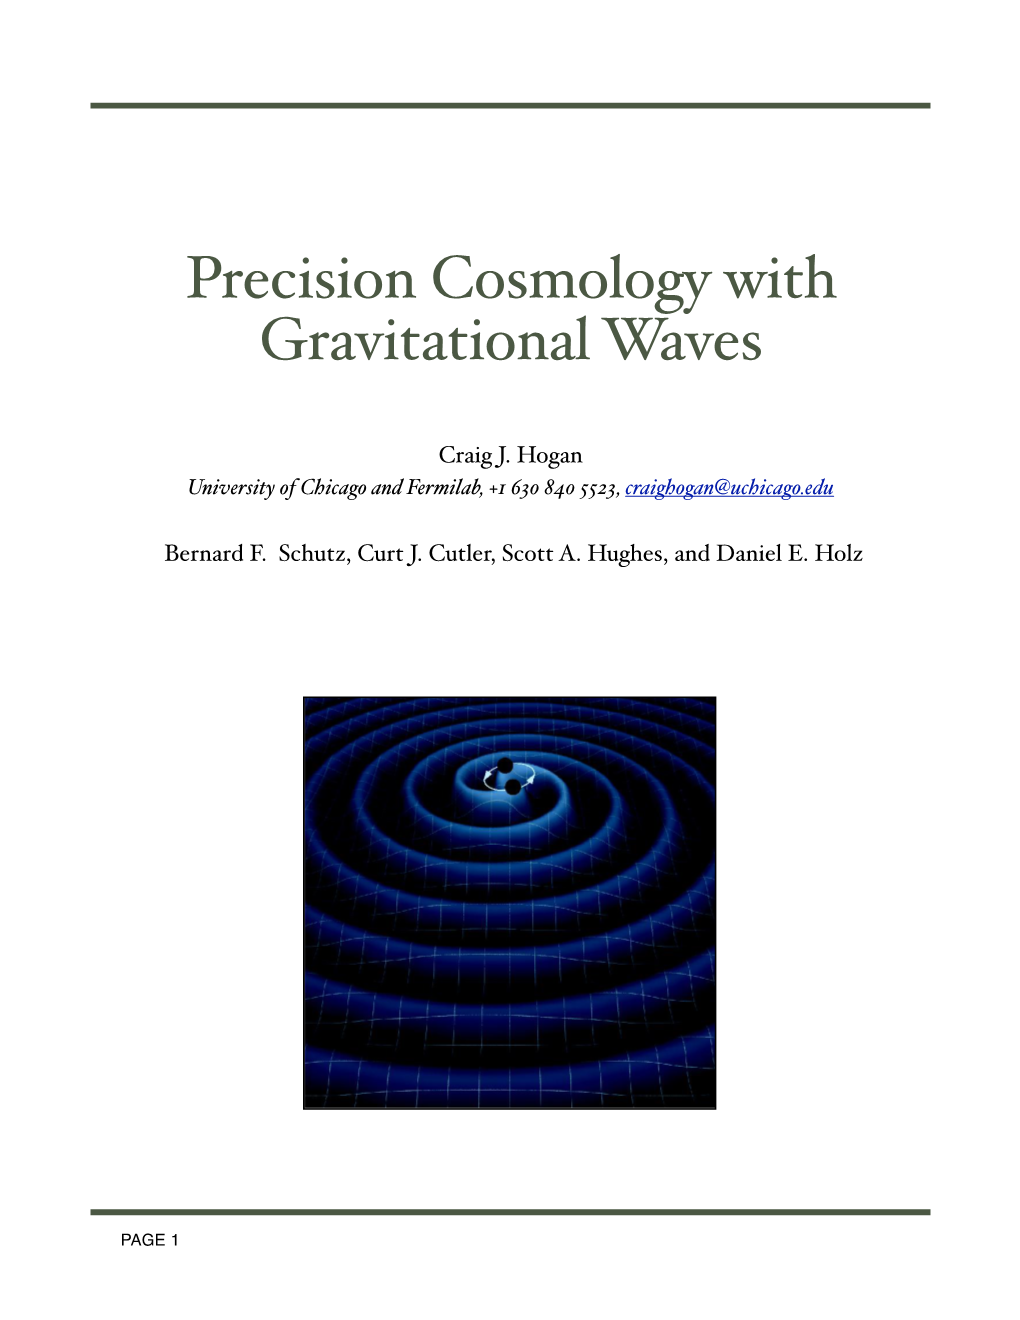 Precision Cosmology with Gravitational Waves